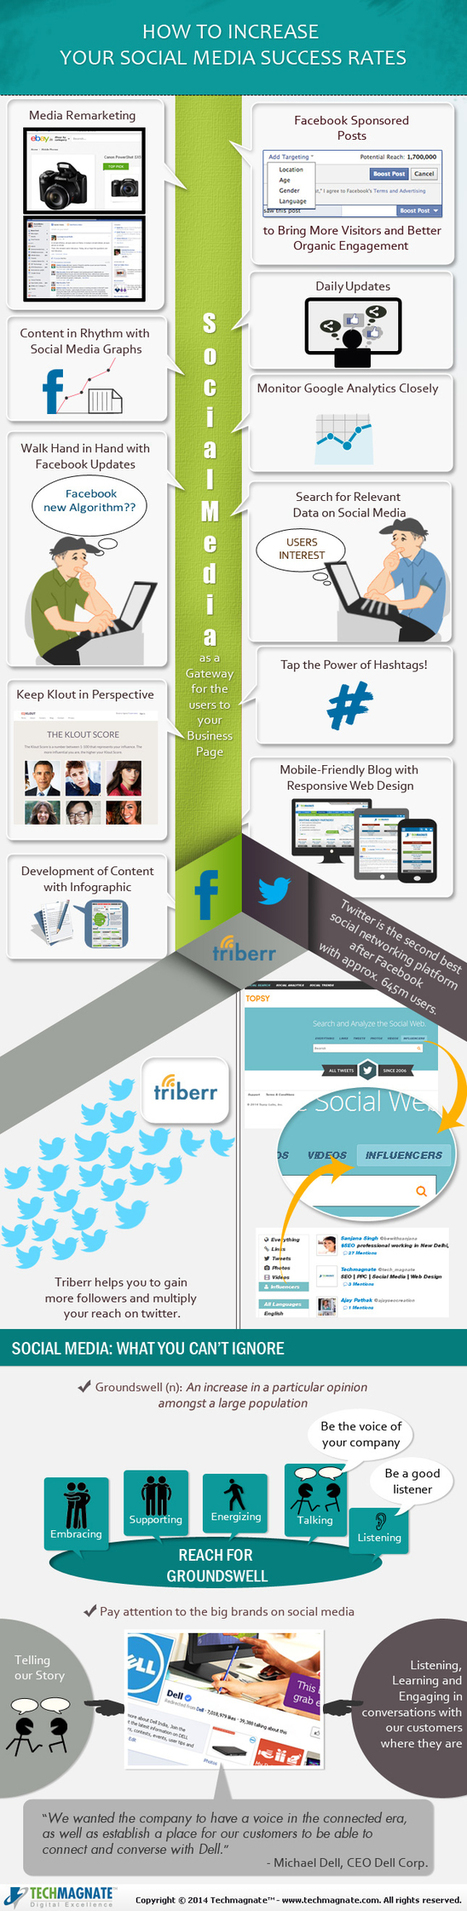 Social Media Infographic: How To Increase Your Success Rates? | digital marketing strategy | Scoop.it